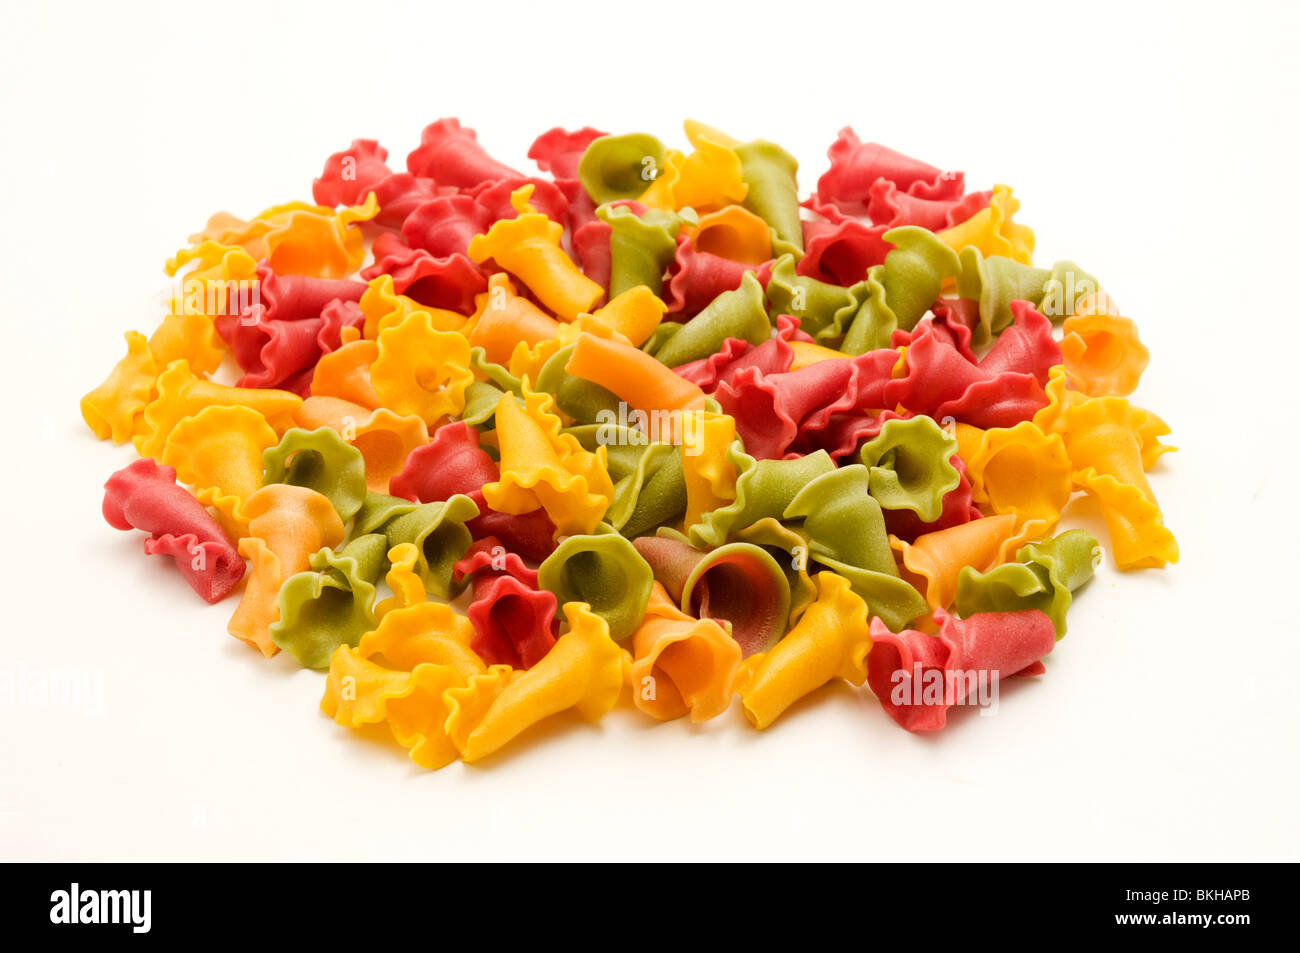 Mixed weird shaped pasta on a white background Stock Photo